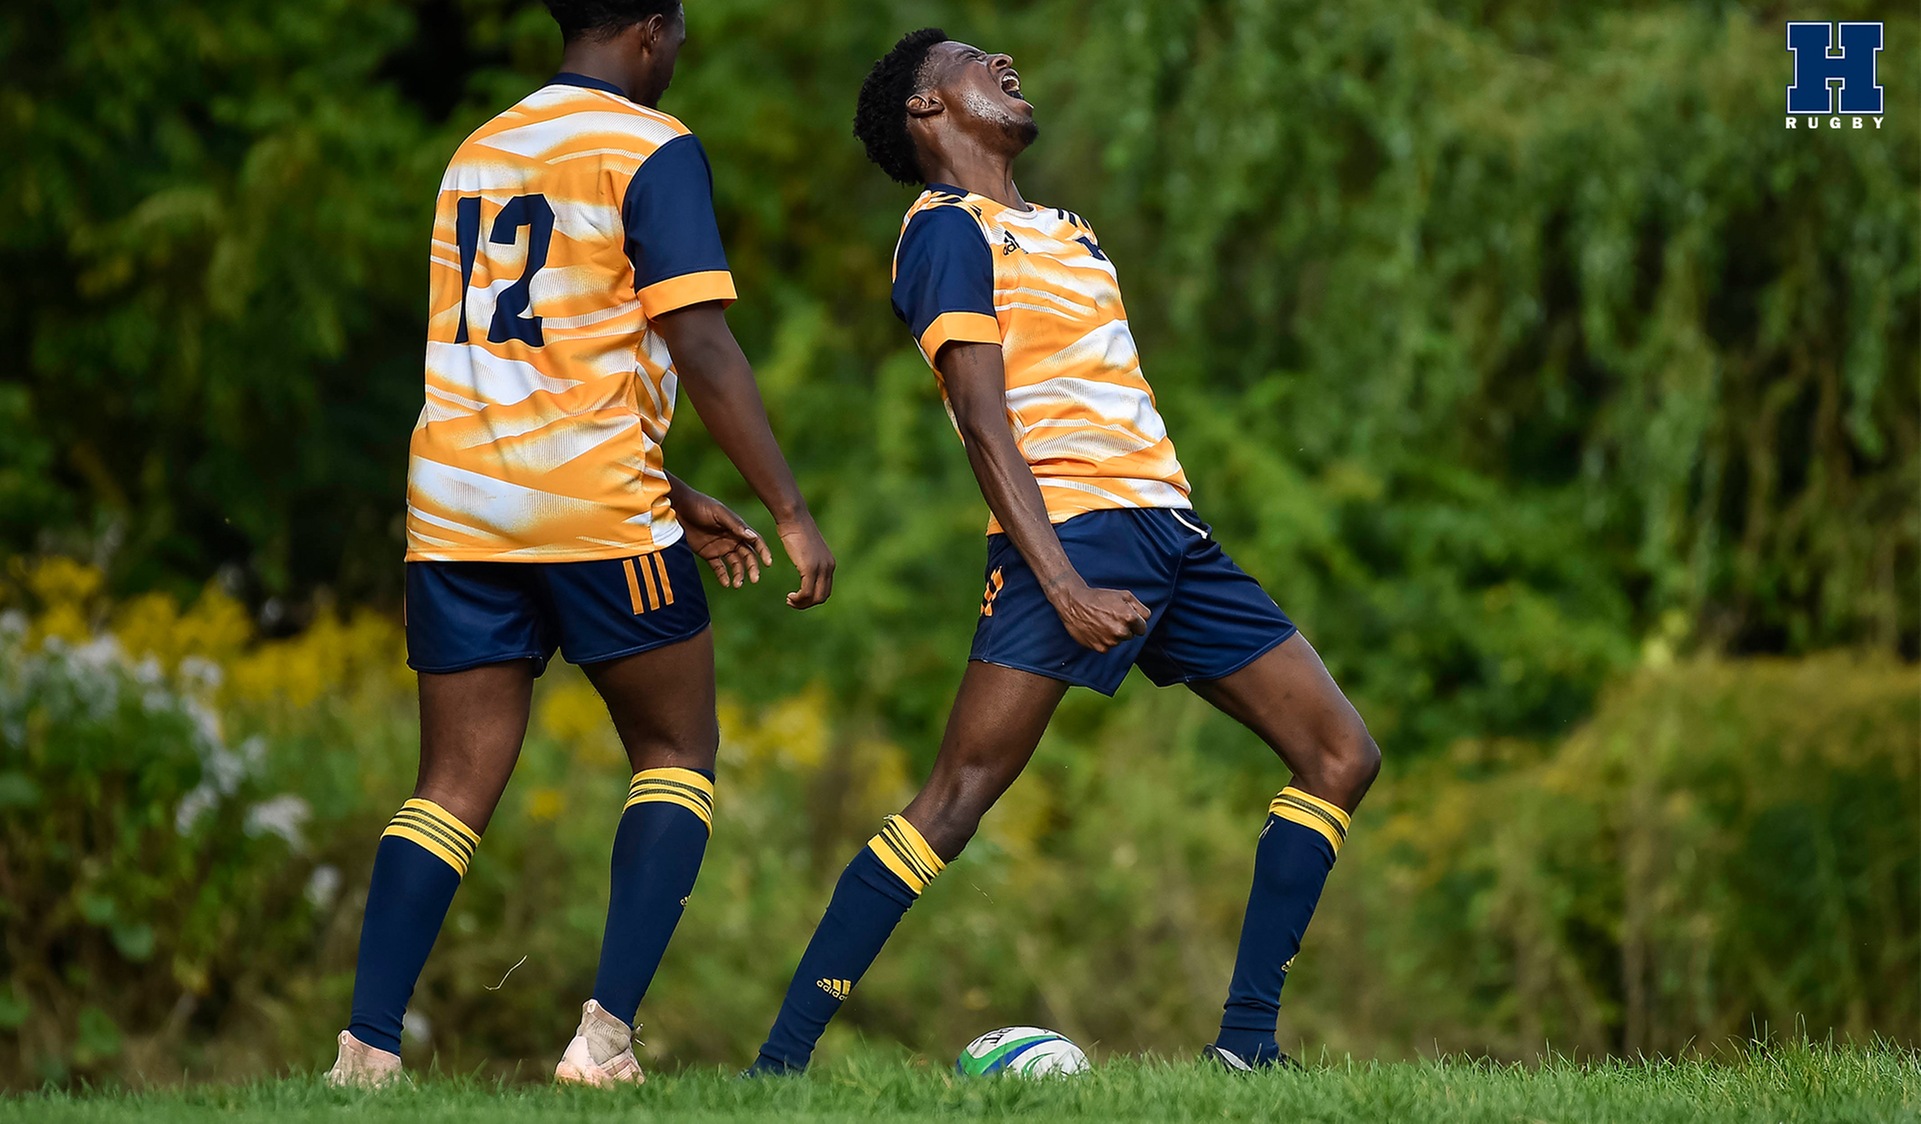 Humber Rugby Dominant in Win Over Mohawk, 68-5